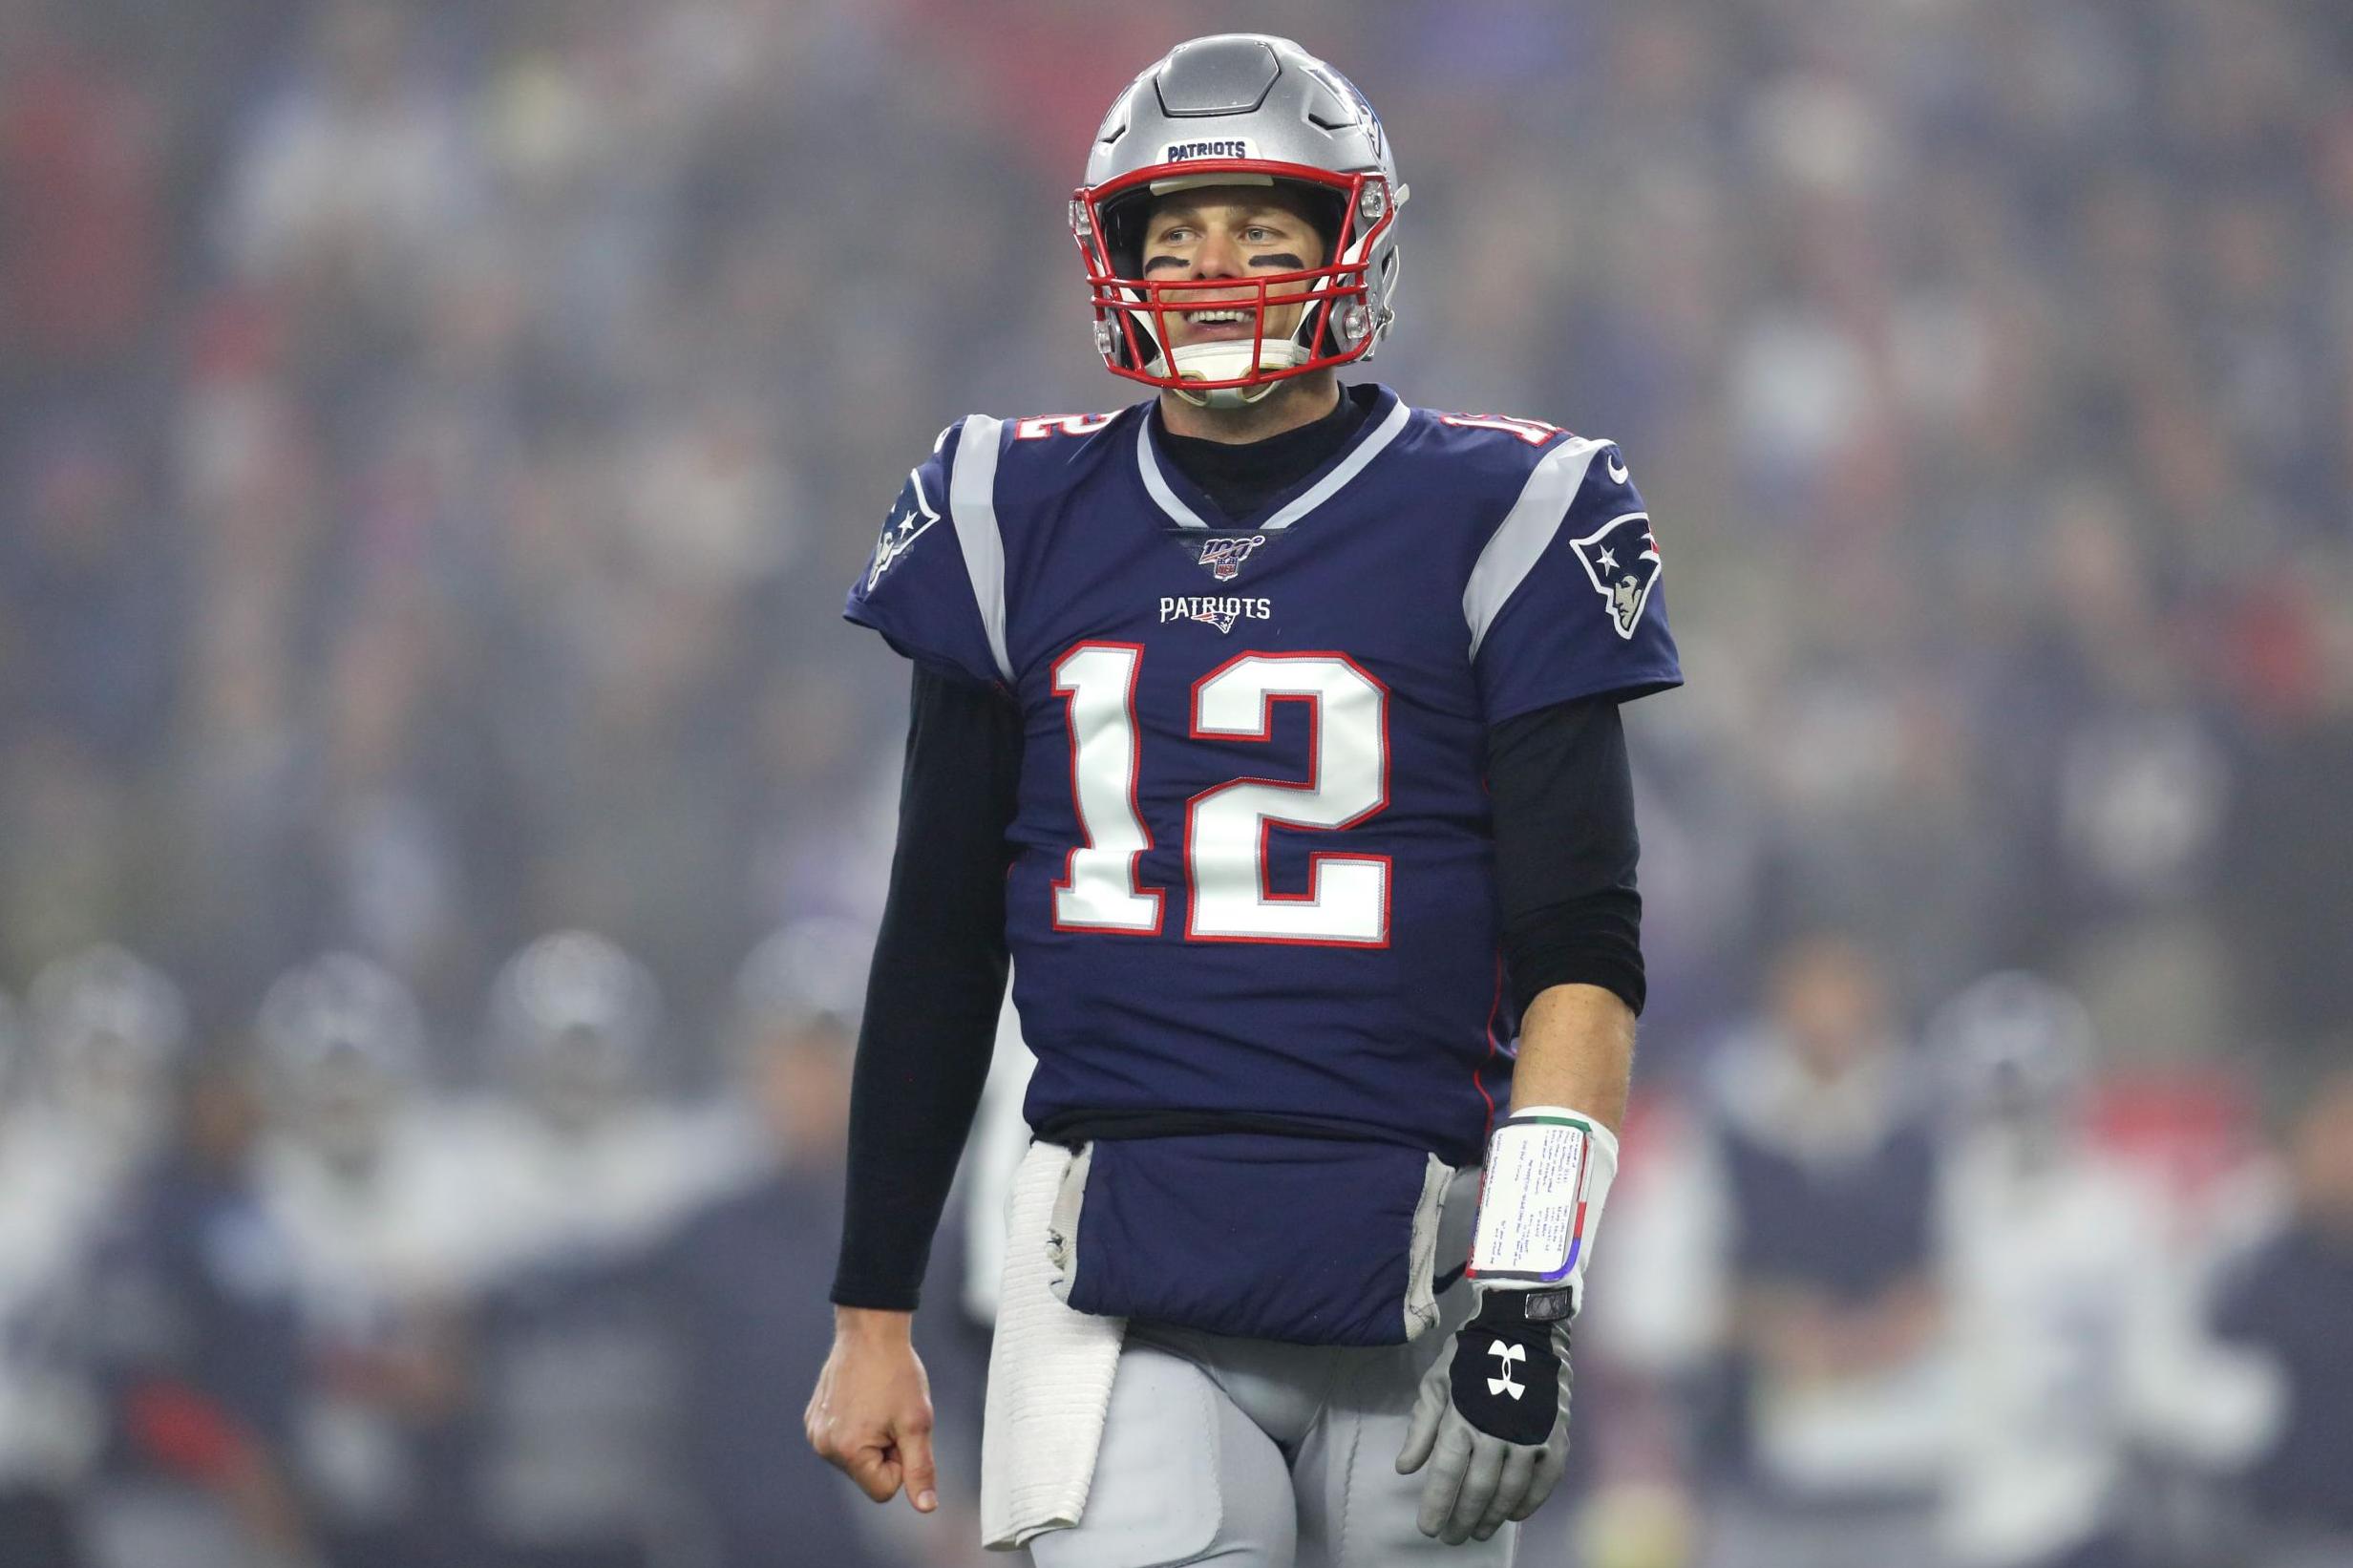 Tom Brady during the playoff game against the Tennessee Titans at Gillette Stadium on 4 January 2020 in Foxborough, Massachusetts.